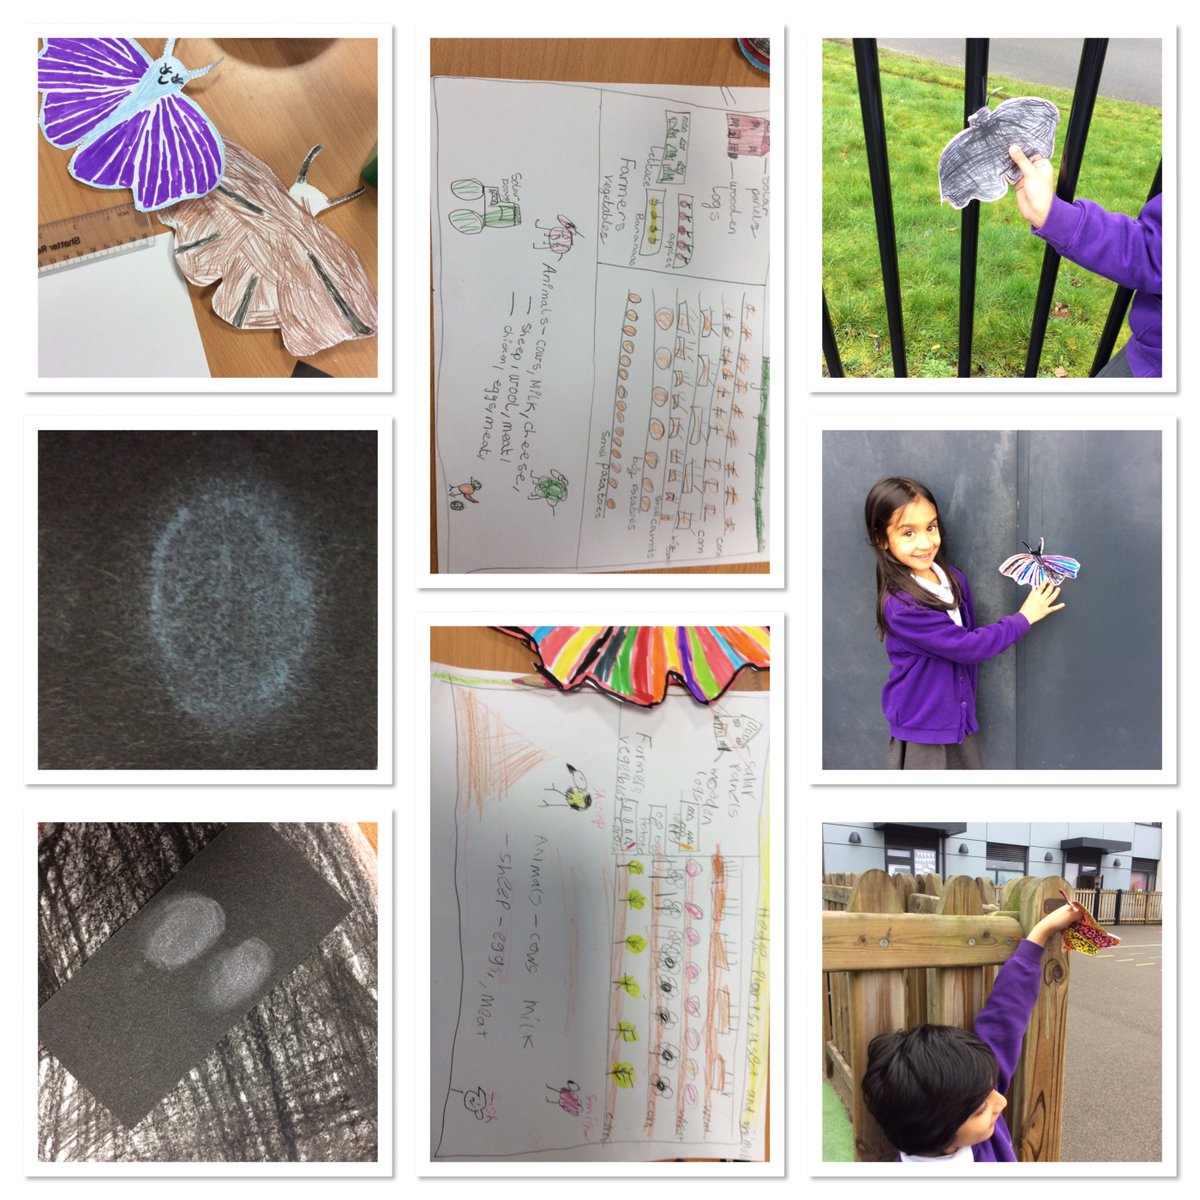 Science week we have looked at finger prints, how animals adapt to their environment and also lots of fun experiments. We also used explorative talk during science week to investigate how we can make a farm sustainable.